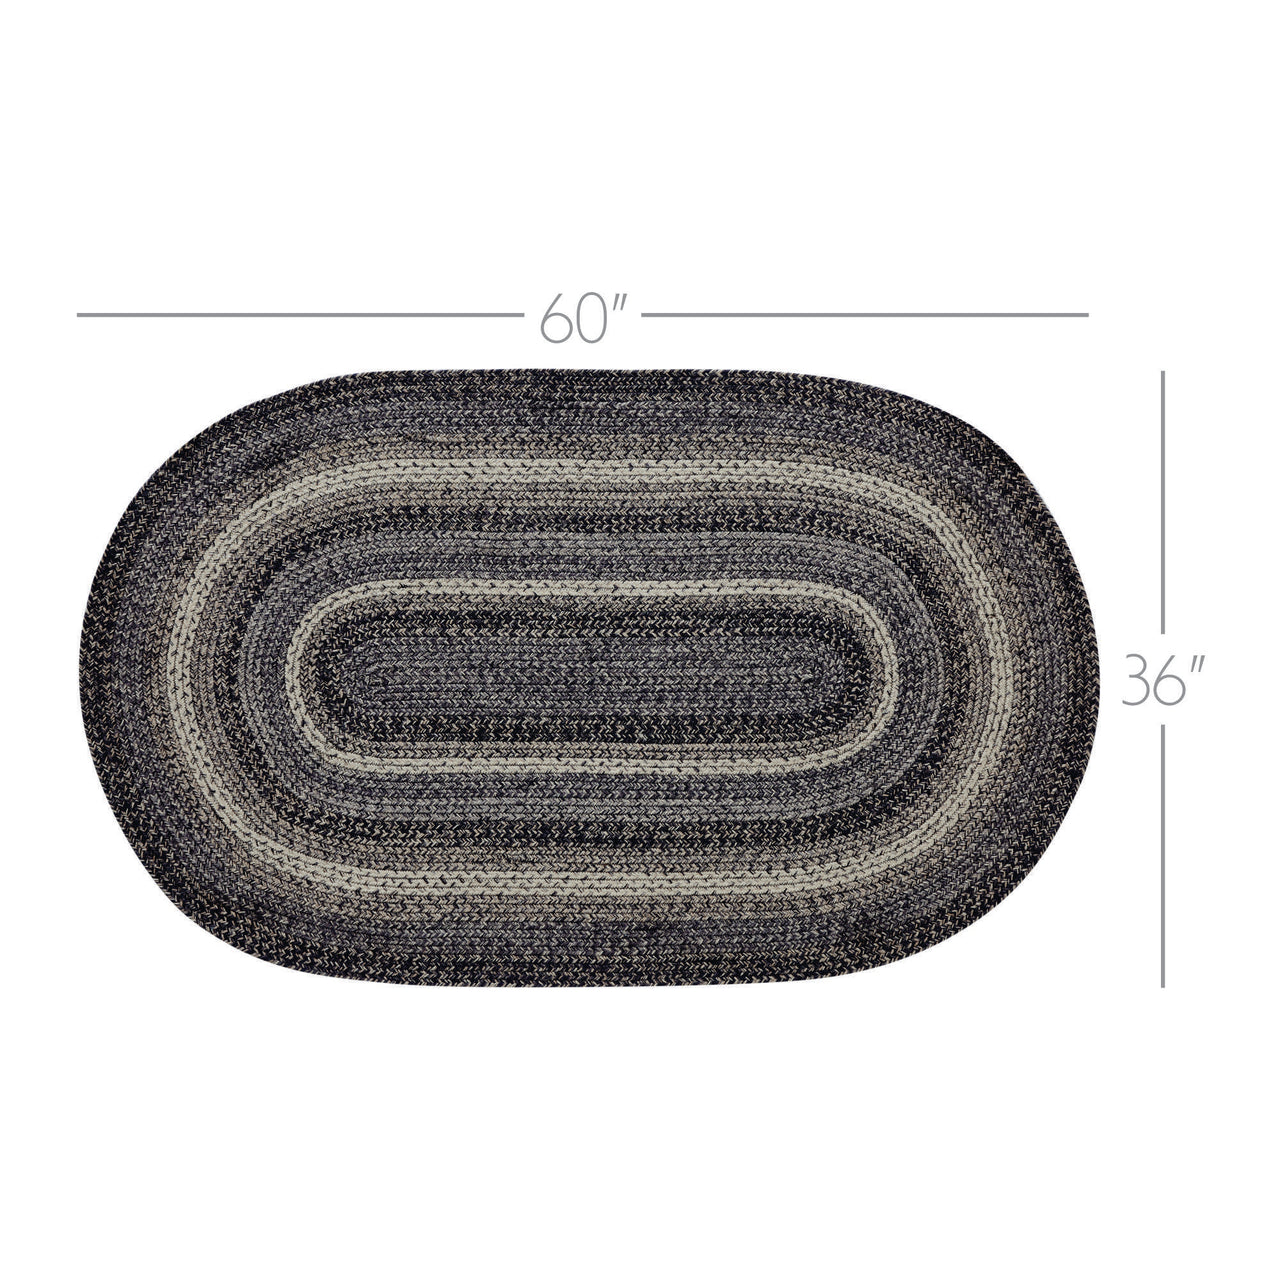 Sawyer Mill Black White Jute Braided Oval Rug with Rug Pad 3x5' VHC Brands